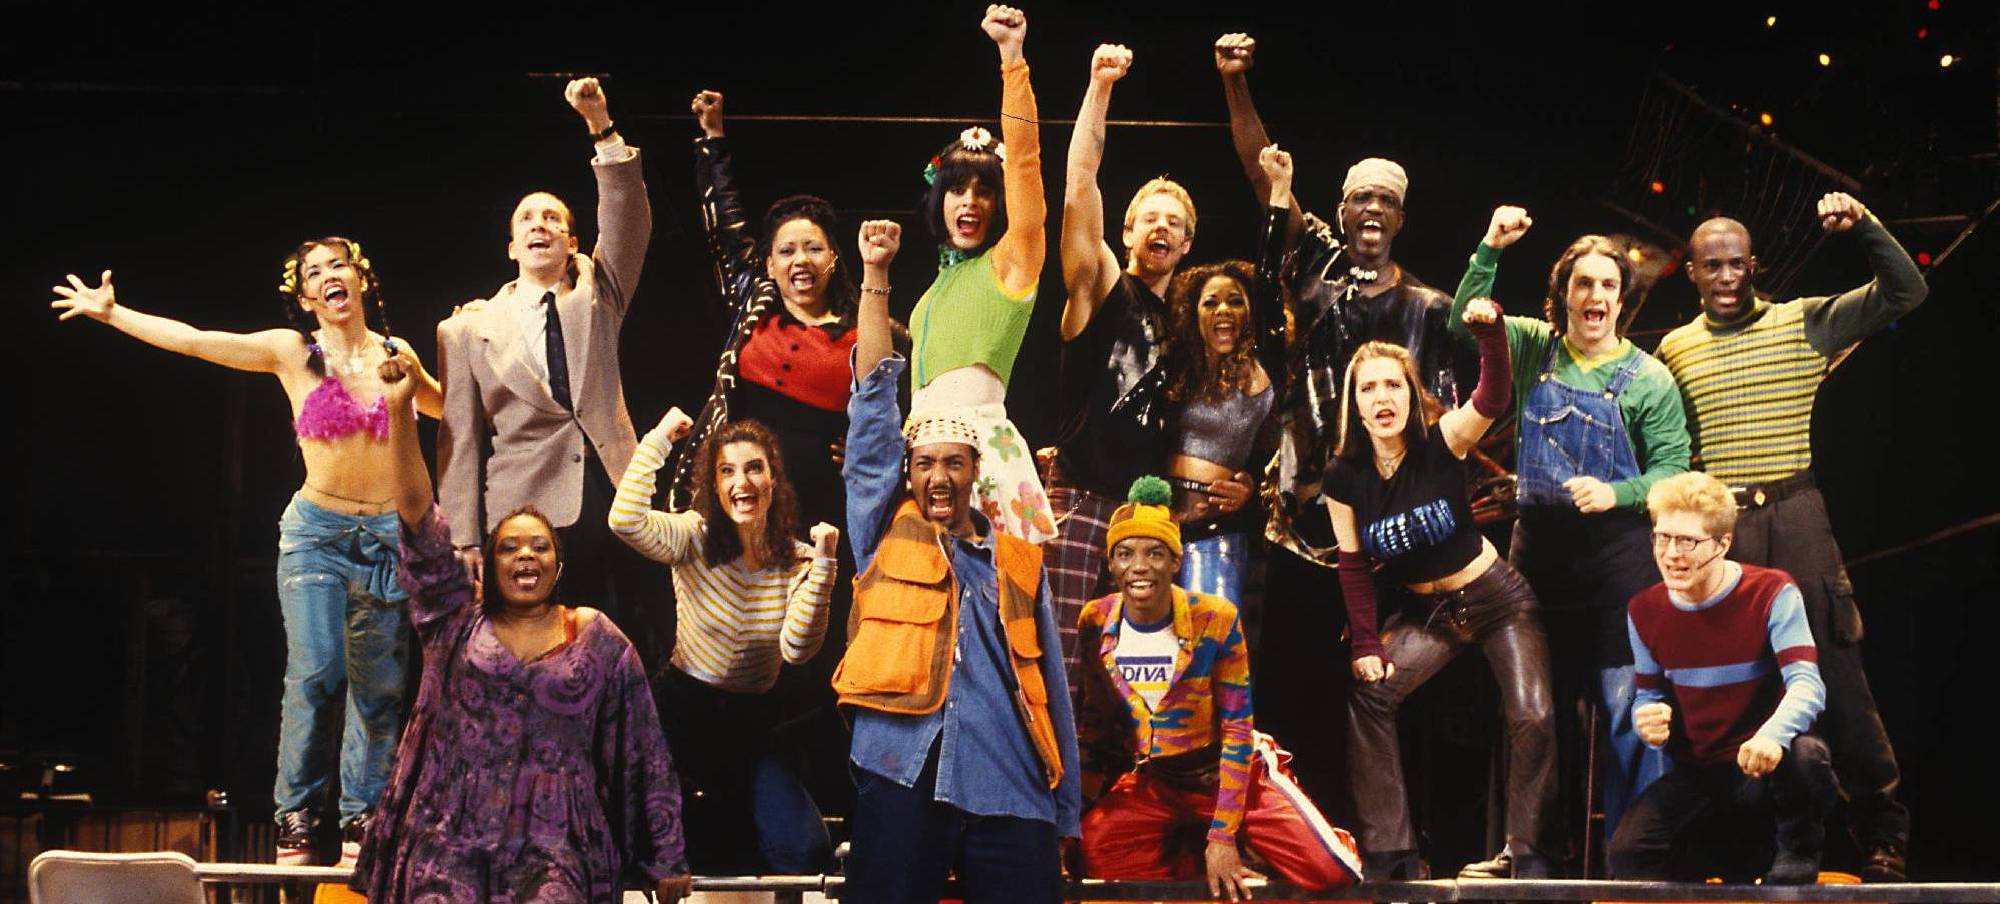 The original cast of the Broadway musical RENT, 1993.